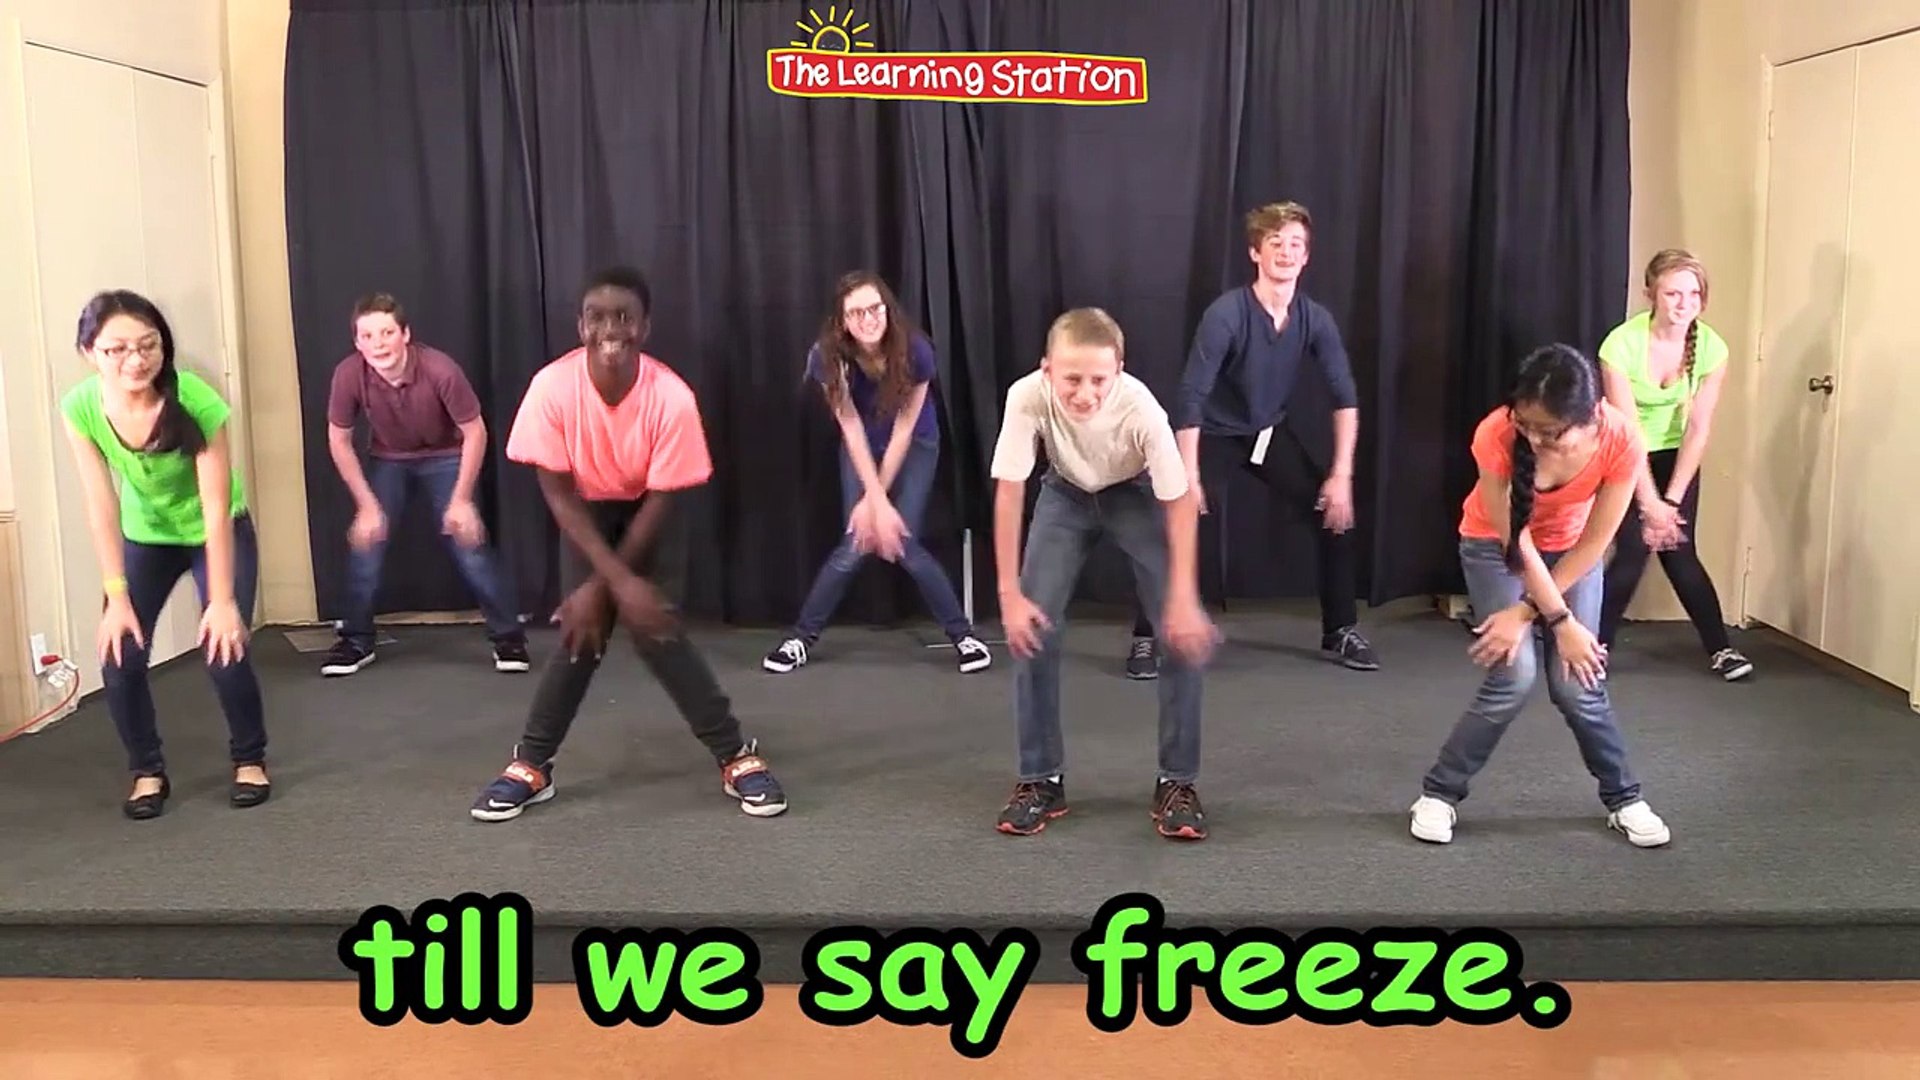 Move and Freeze Dance for Kids, Freeze Song